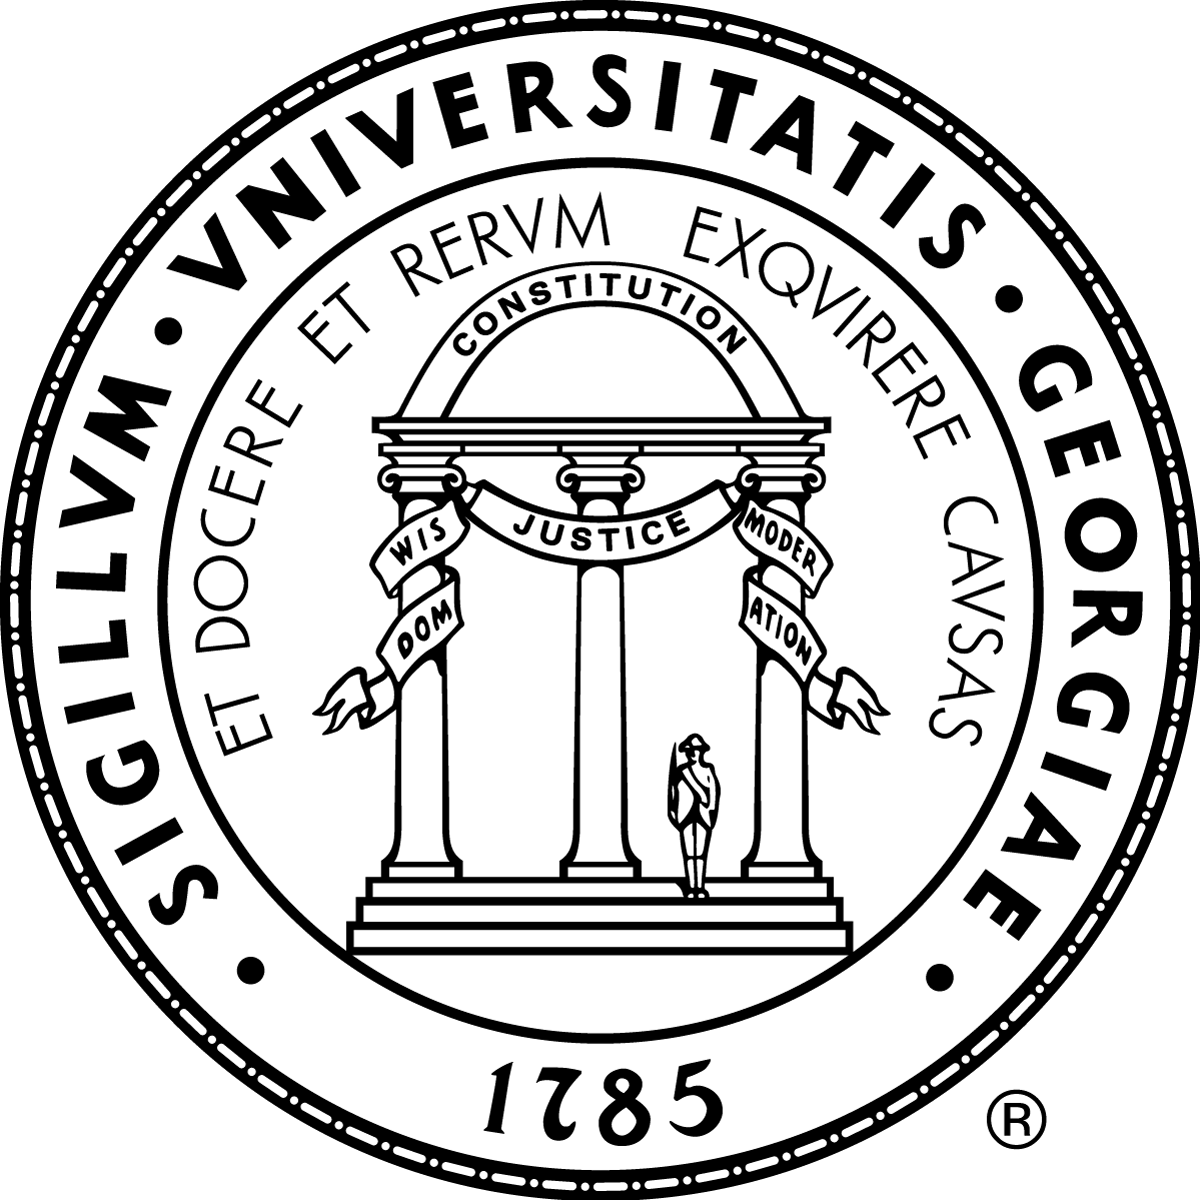 The Seal Is Reserved For Use On Official University Documents Such As Diplomas, Transcripts, Official Records, Legally Binding Documents, Materials Issued Hdpng.com  - Uga, Transparent background PNG HD thumbnail